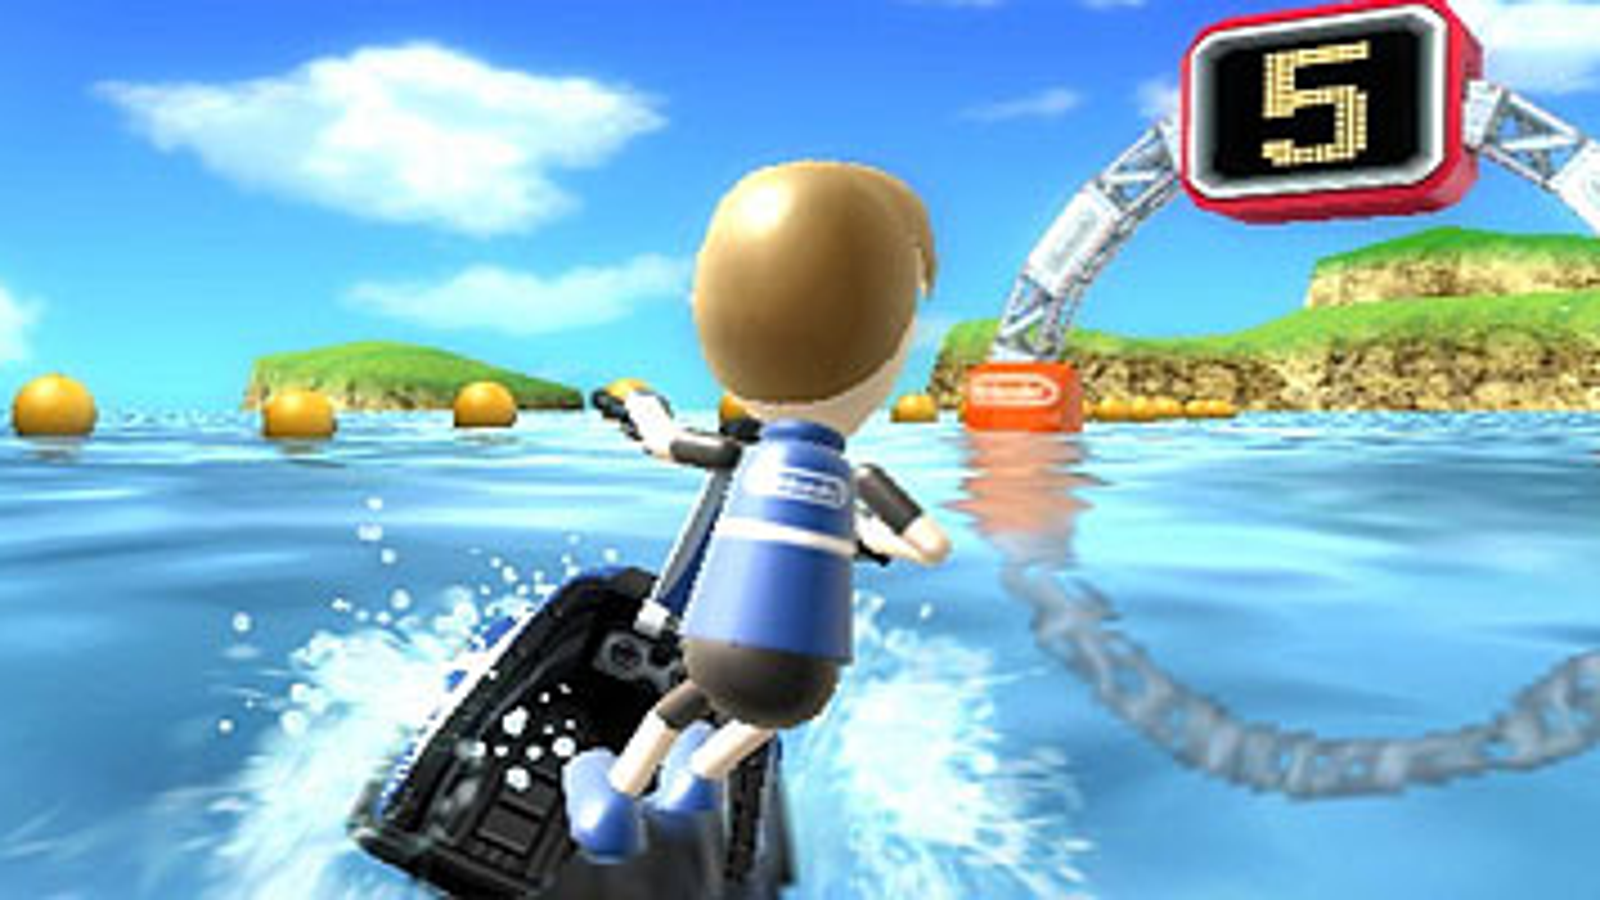 Wii Sports Resort moves through 1.25 million units in North America